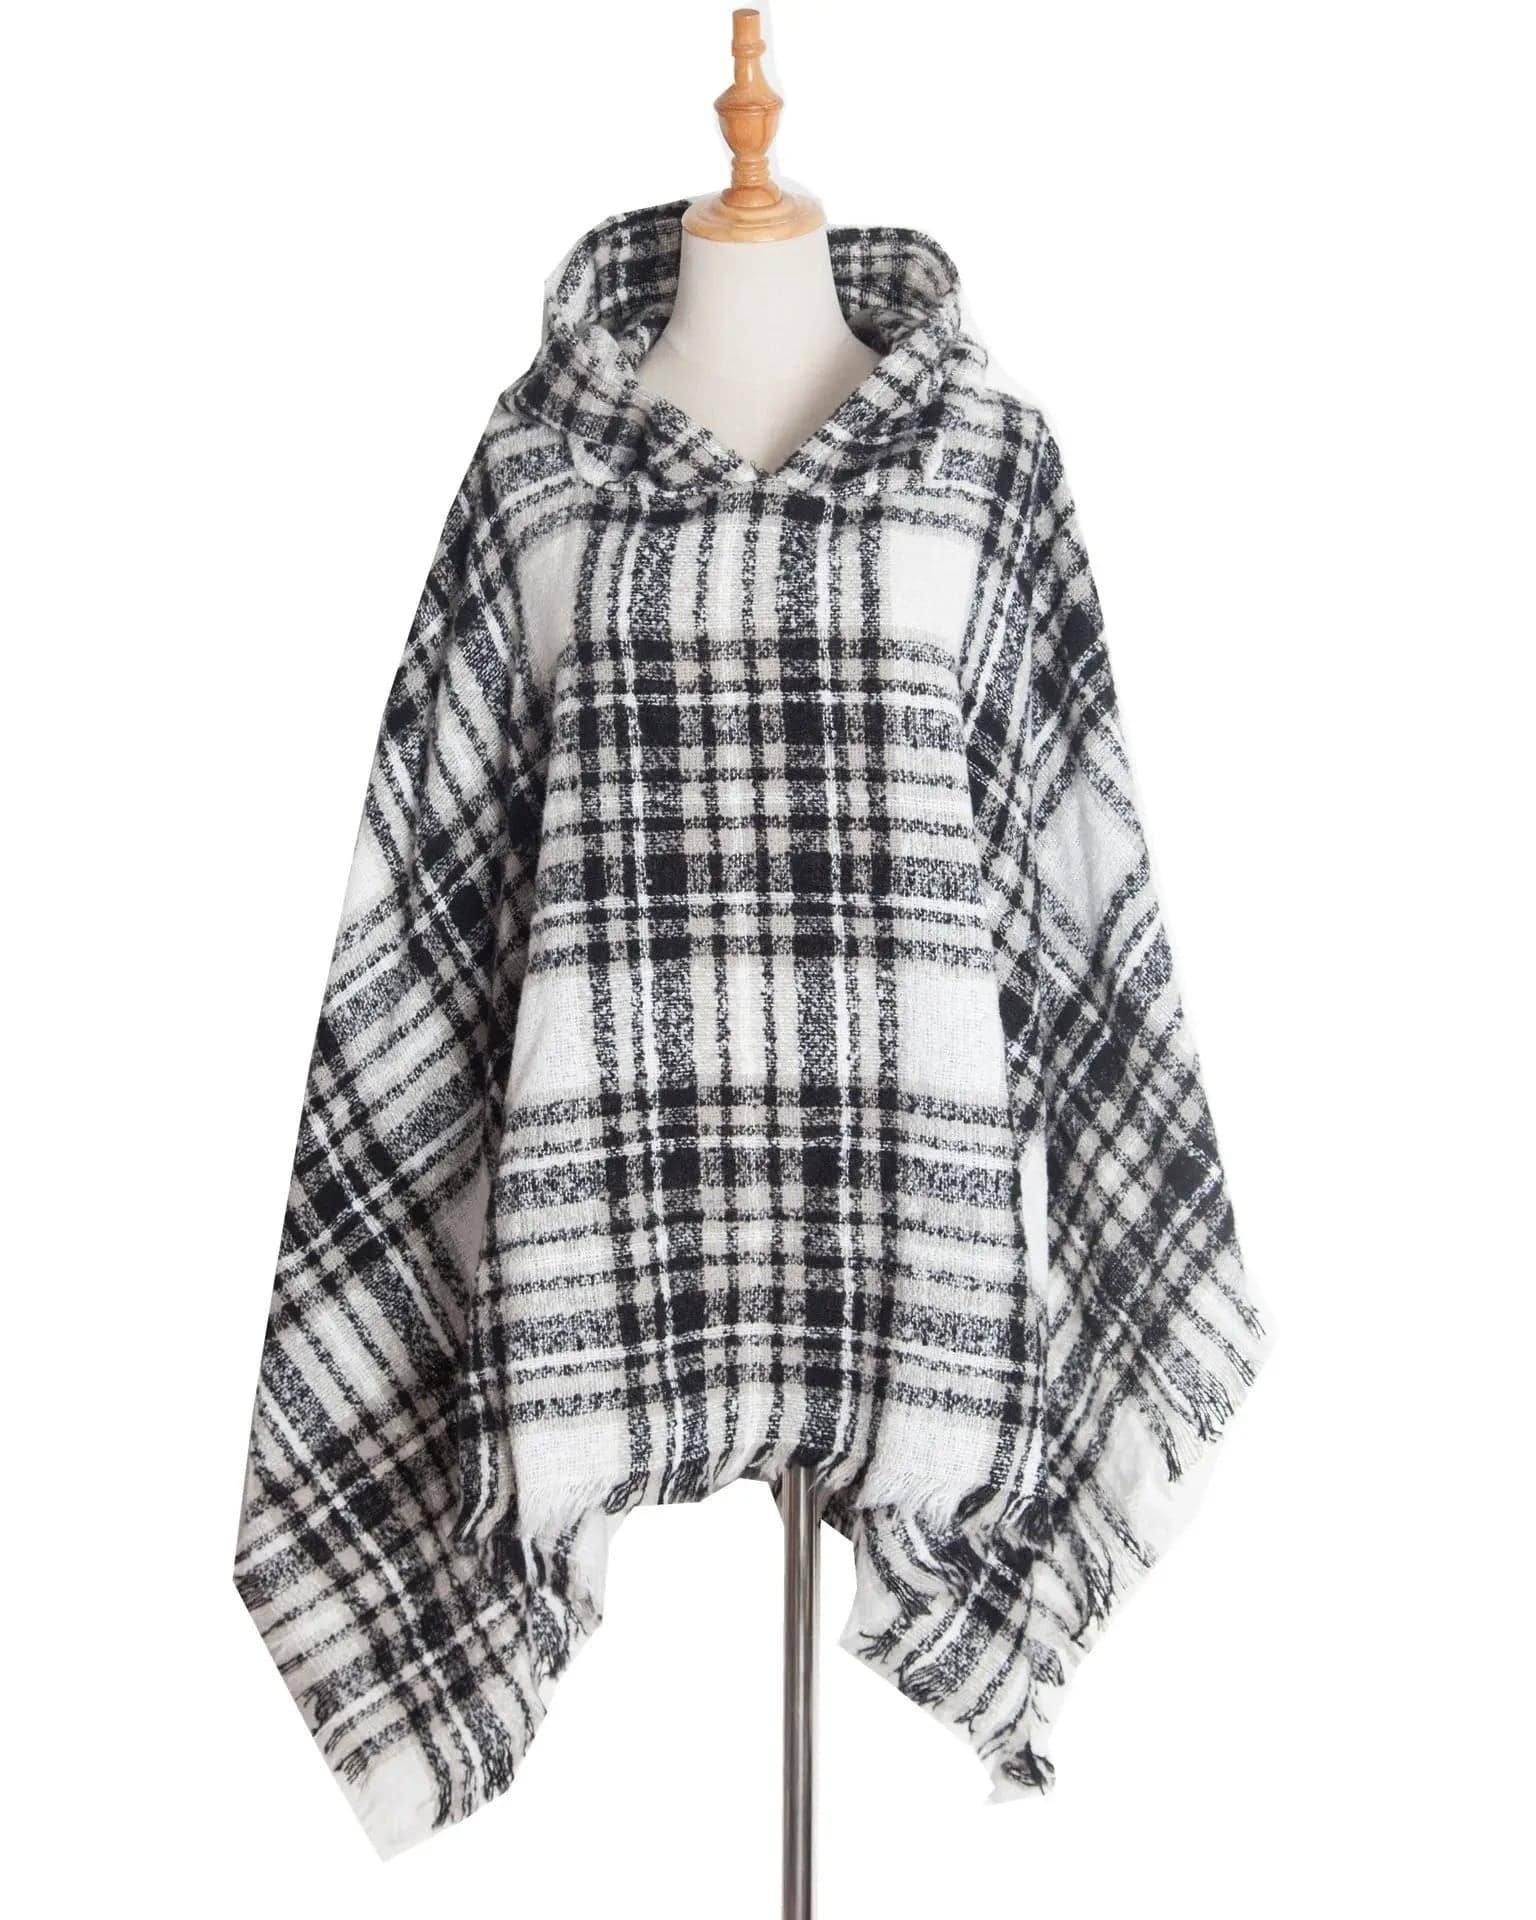 Spring Autumn And Winter Plaid Ribbon Cap Cape And Shawl-DP6 06 Black And White-19